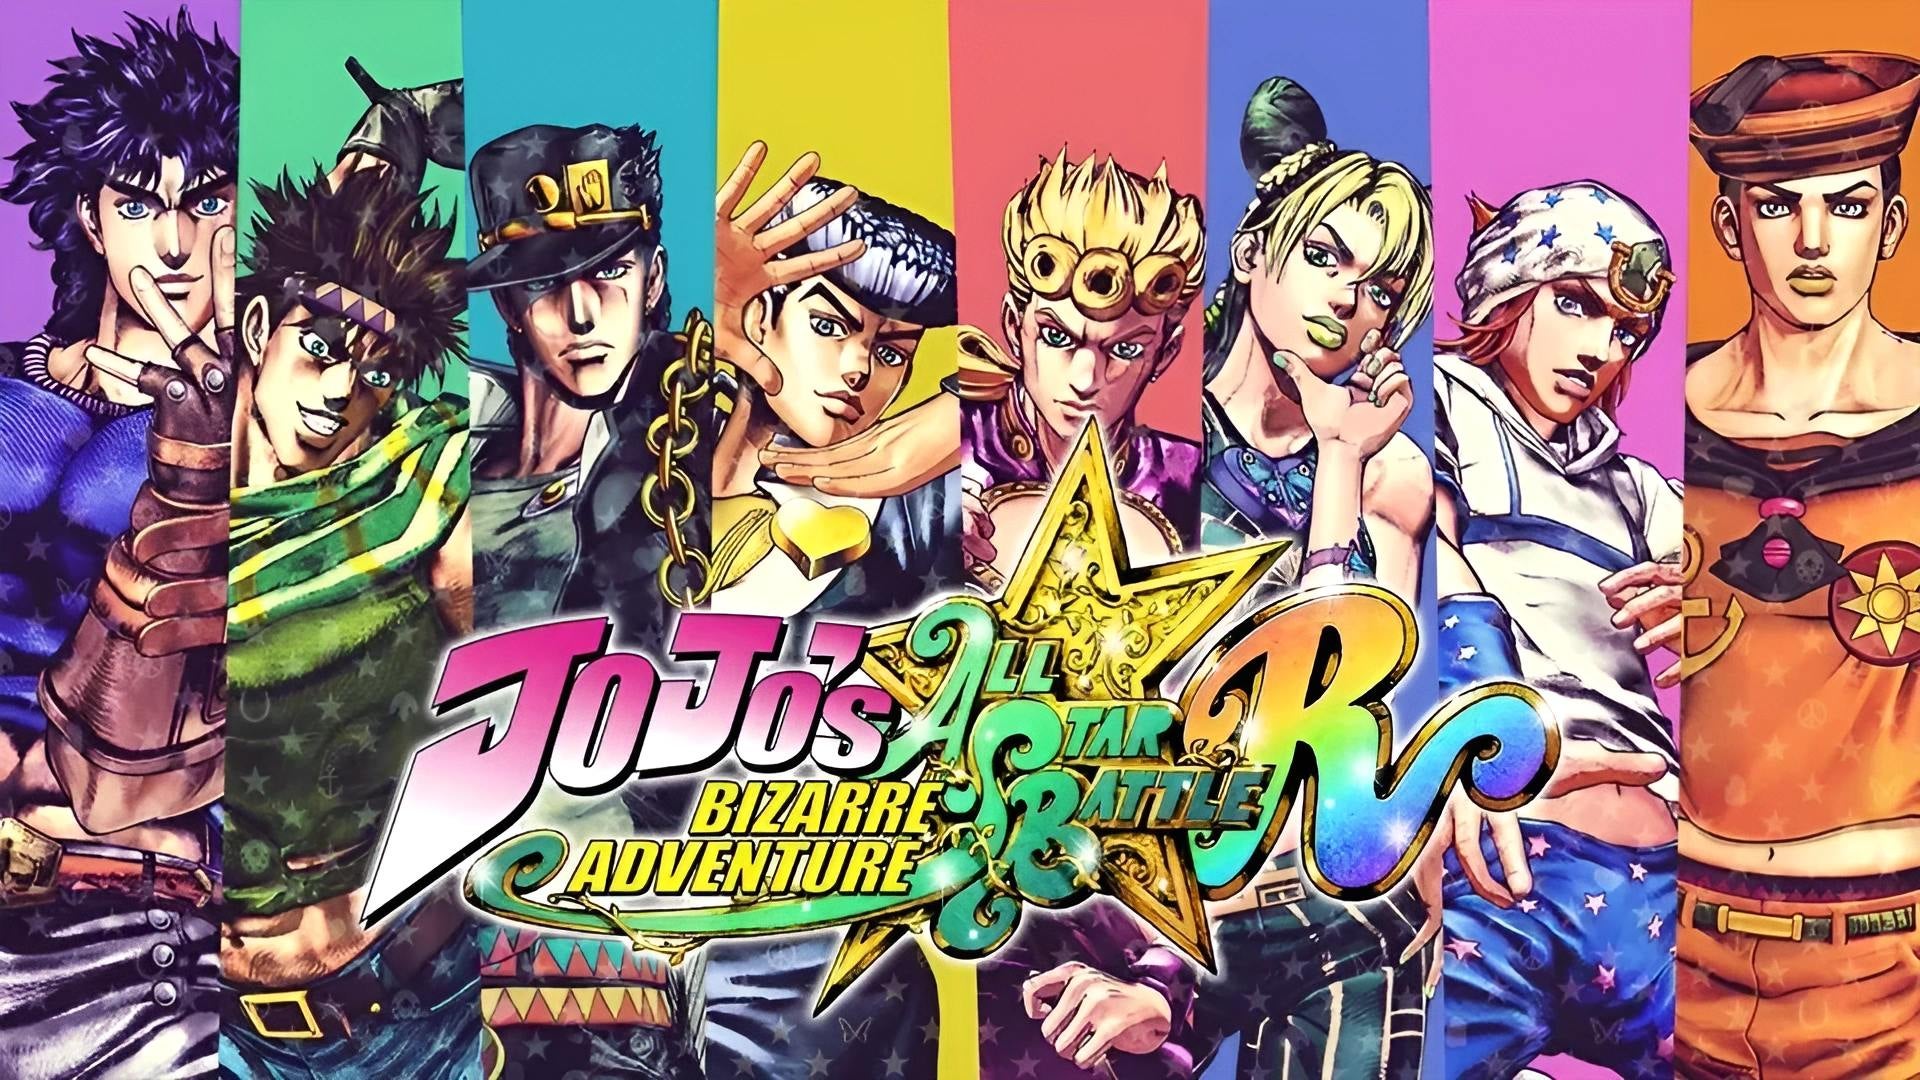 JoJo's Bizarre Adventure's Super-Deformed Character Project Gets Mobile Game  This Fall - News - Anime News Network